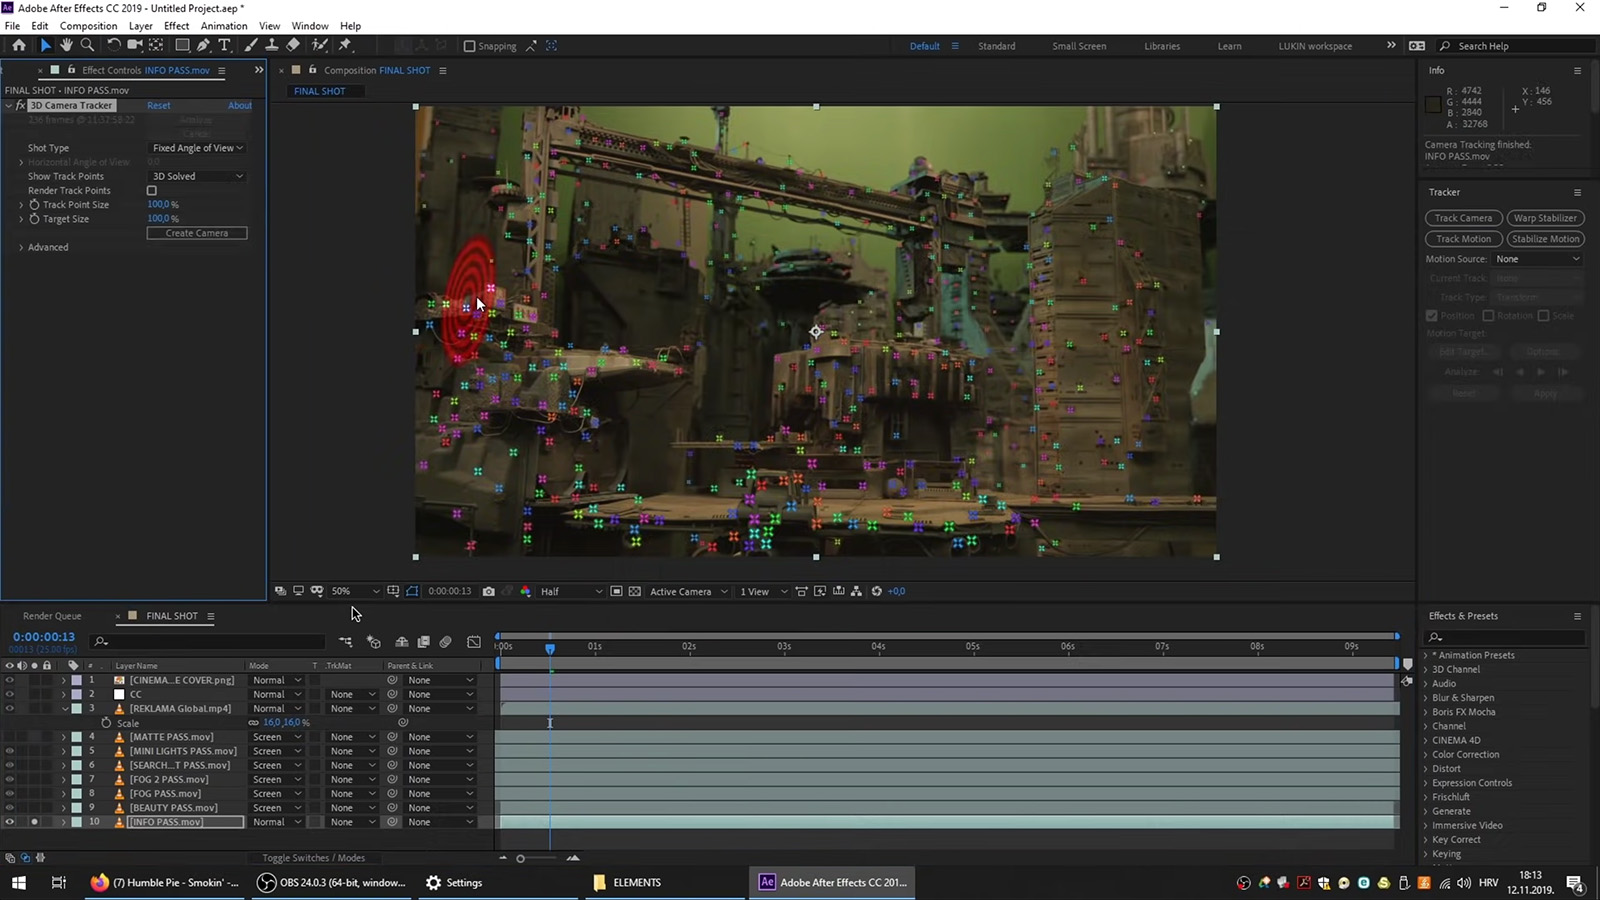 Camera tracking / match moving in After Effects for Slice of Life